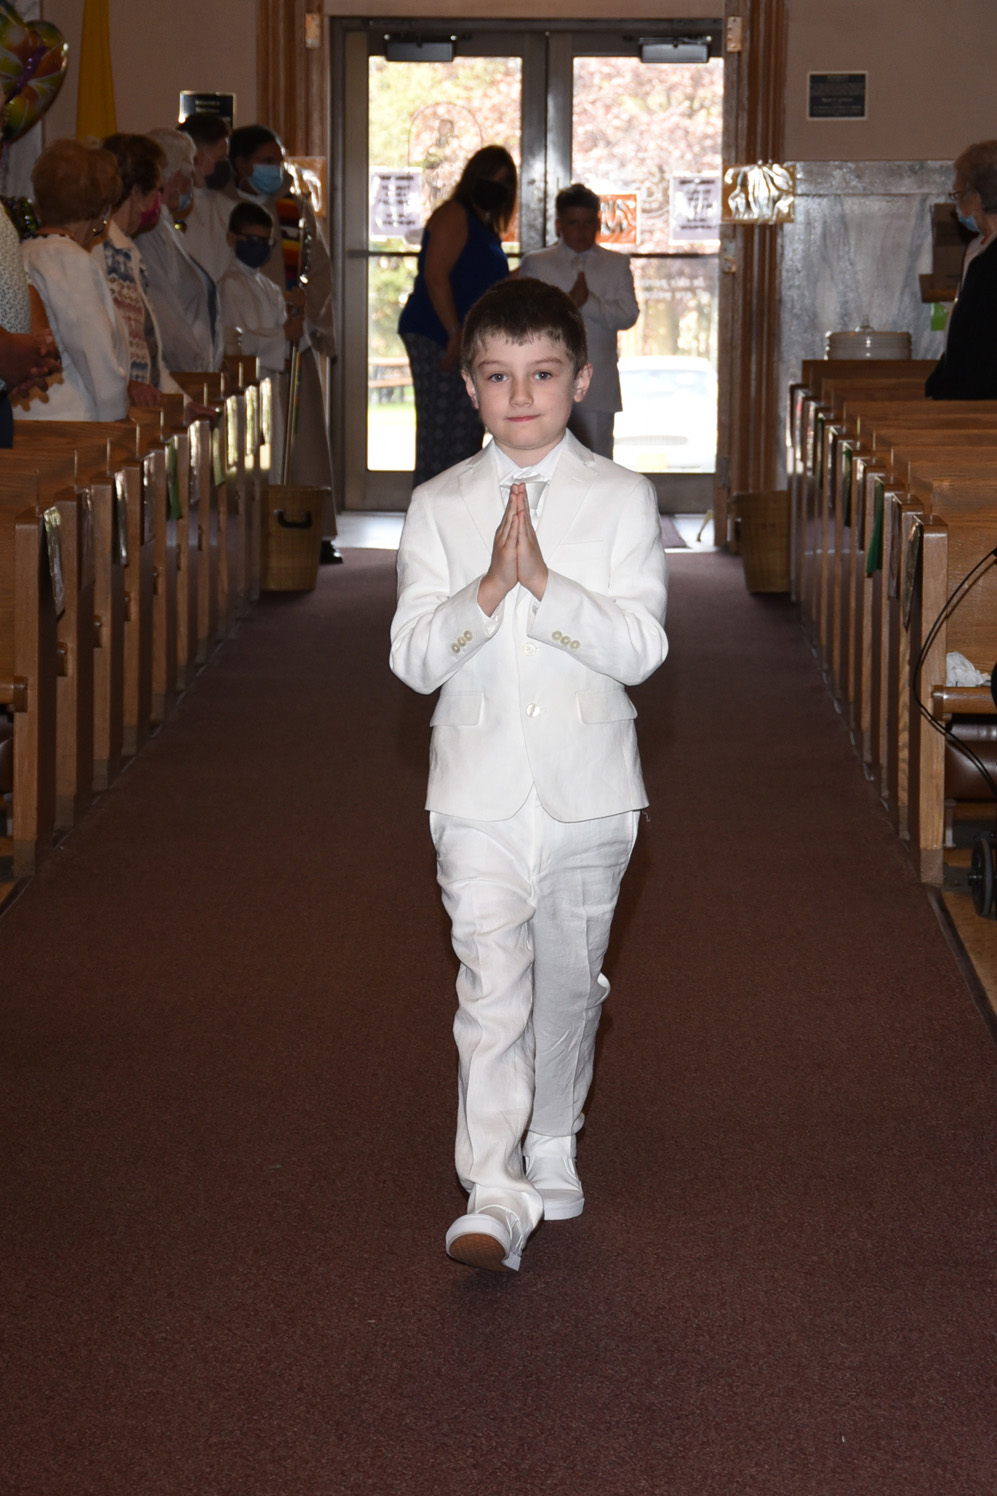 FIRST-COMMUNION-MAY-15-2021-10011060